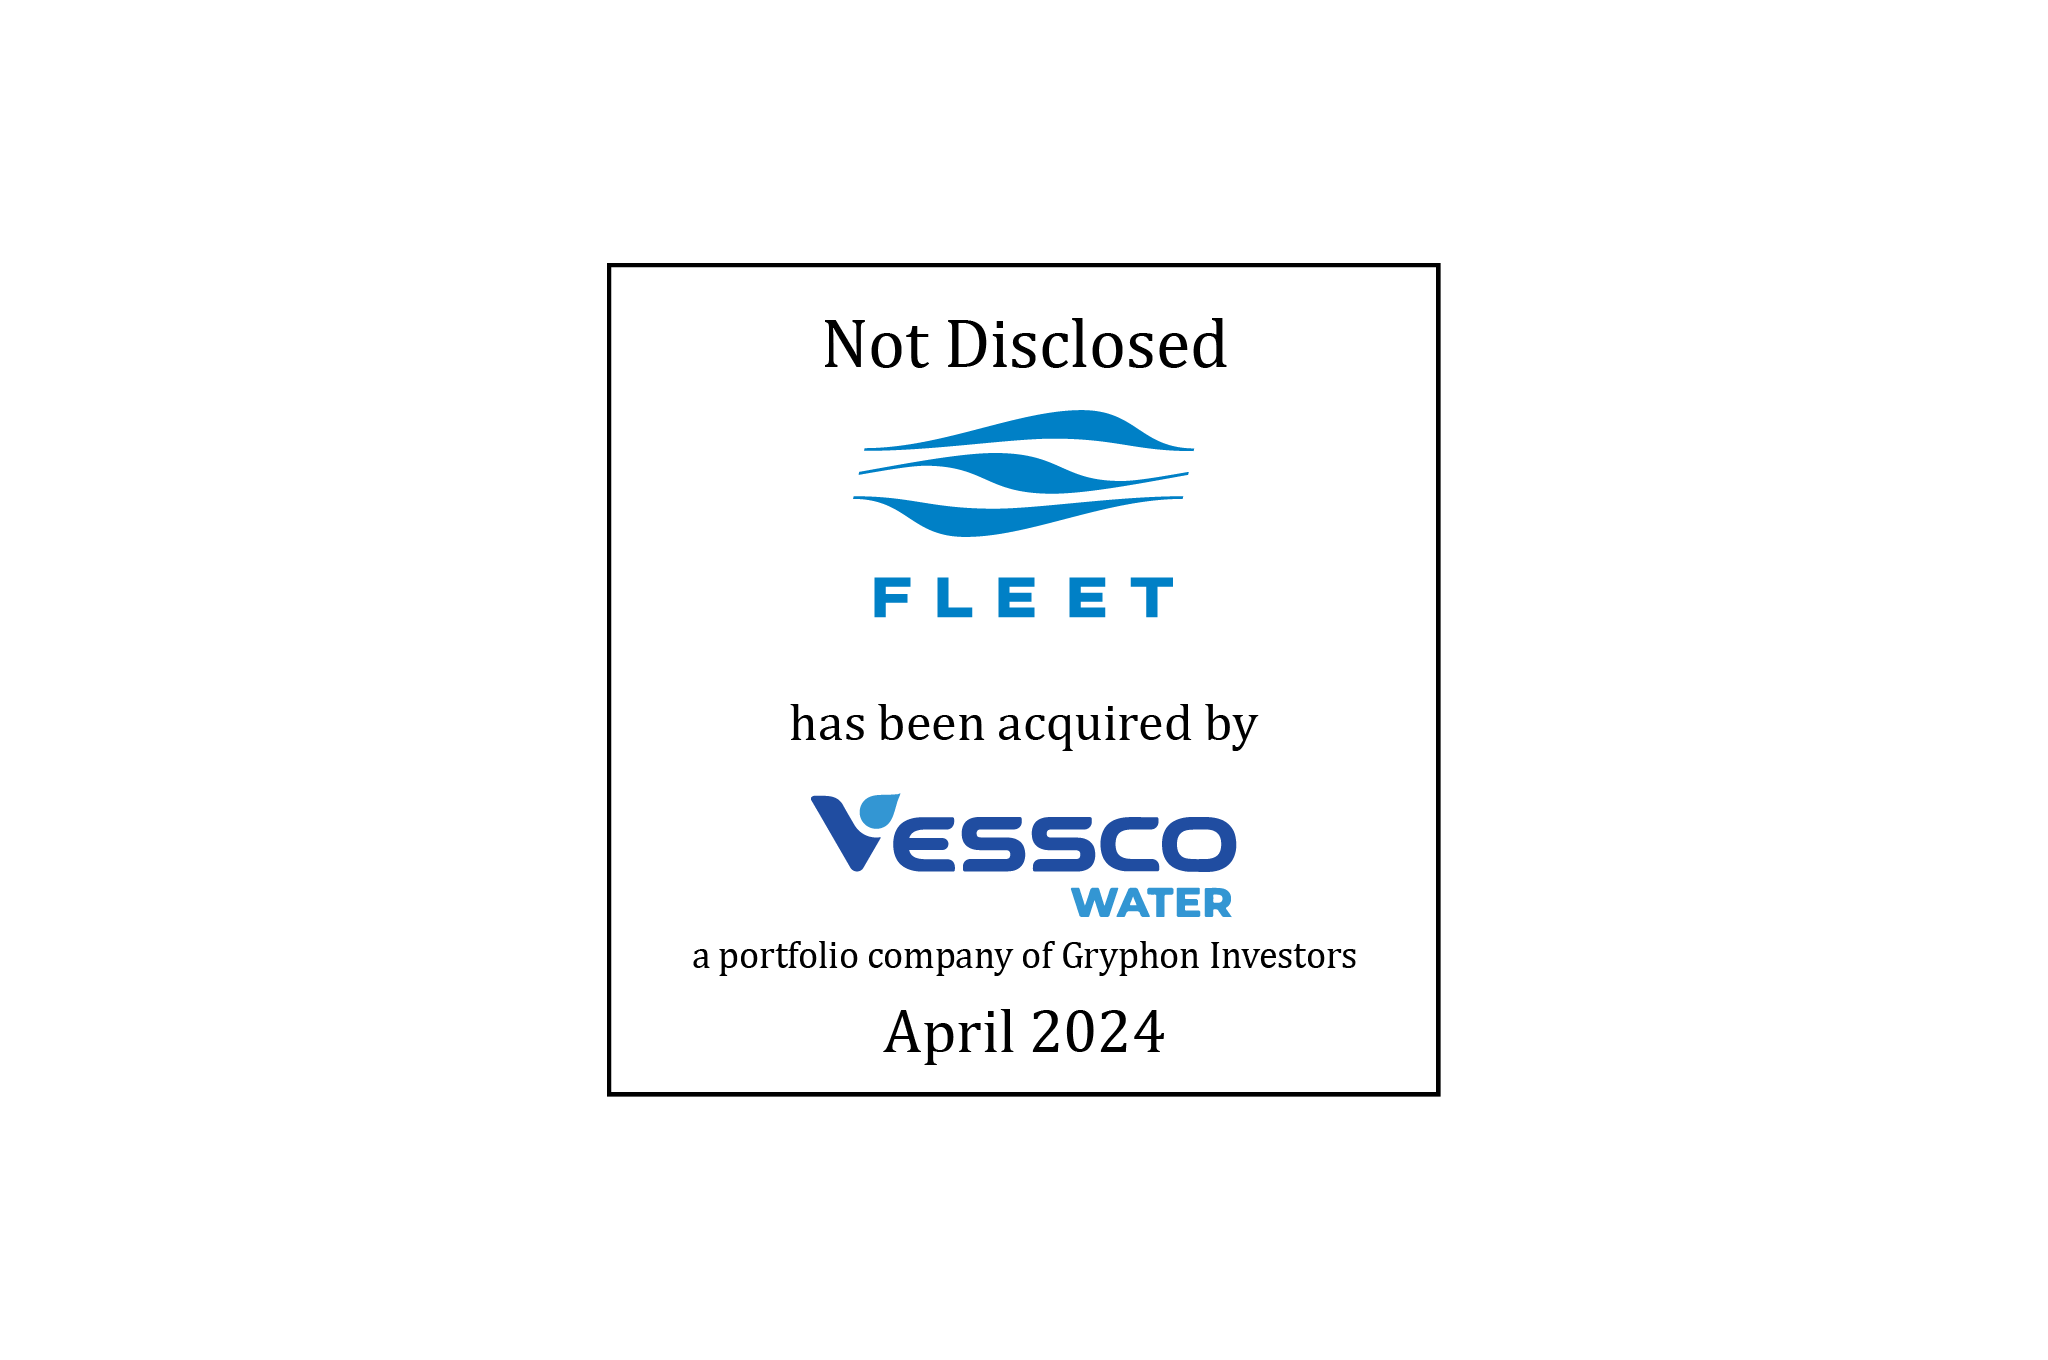 Not Disclosed | Fleet (logo) has been acquired by Vessco Water (logo), a portfolio company of Gryphon Investors | April 2024